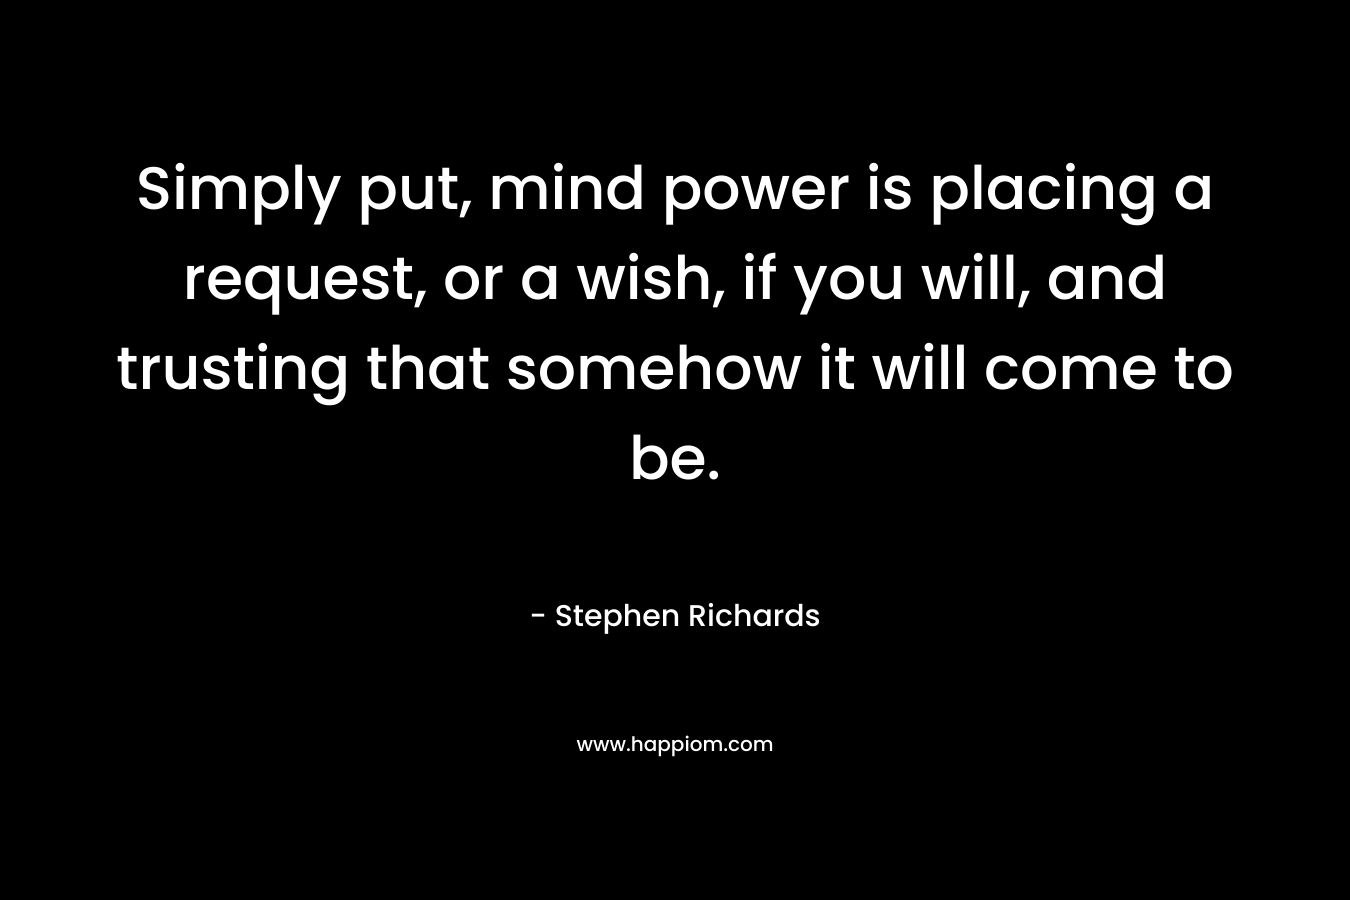 Simply put, mind power is placing a request, or a wish, if you will, and trusting that somehow it will come to be. – Stephen Richards